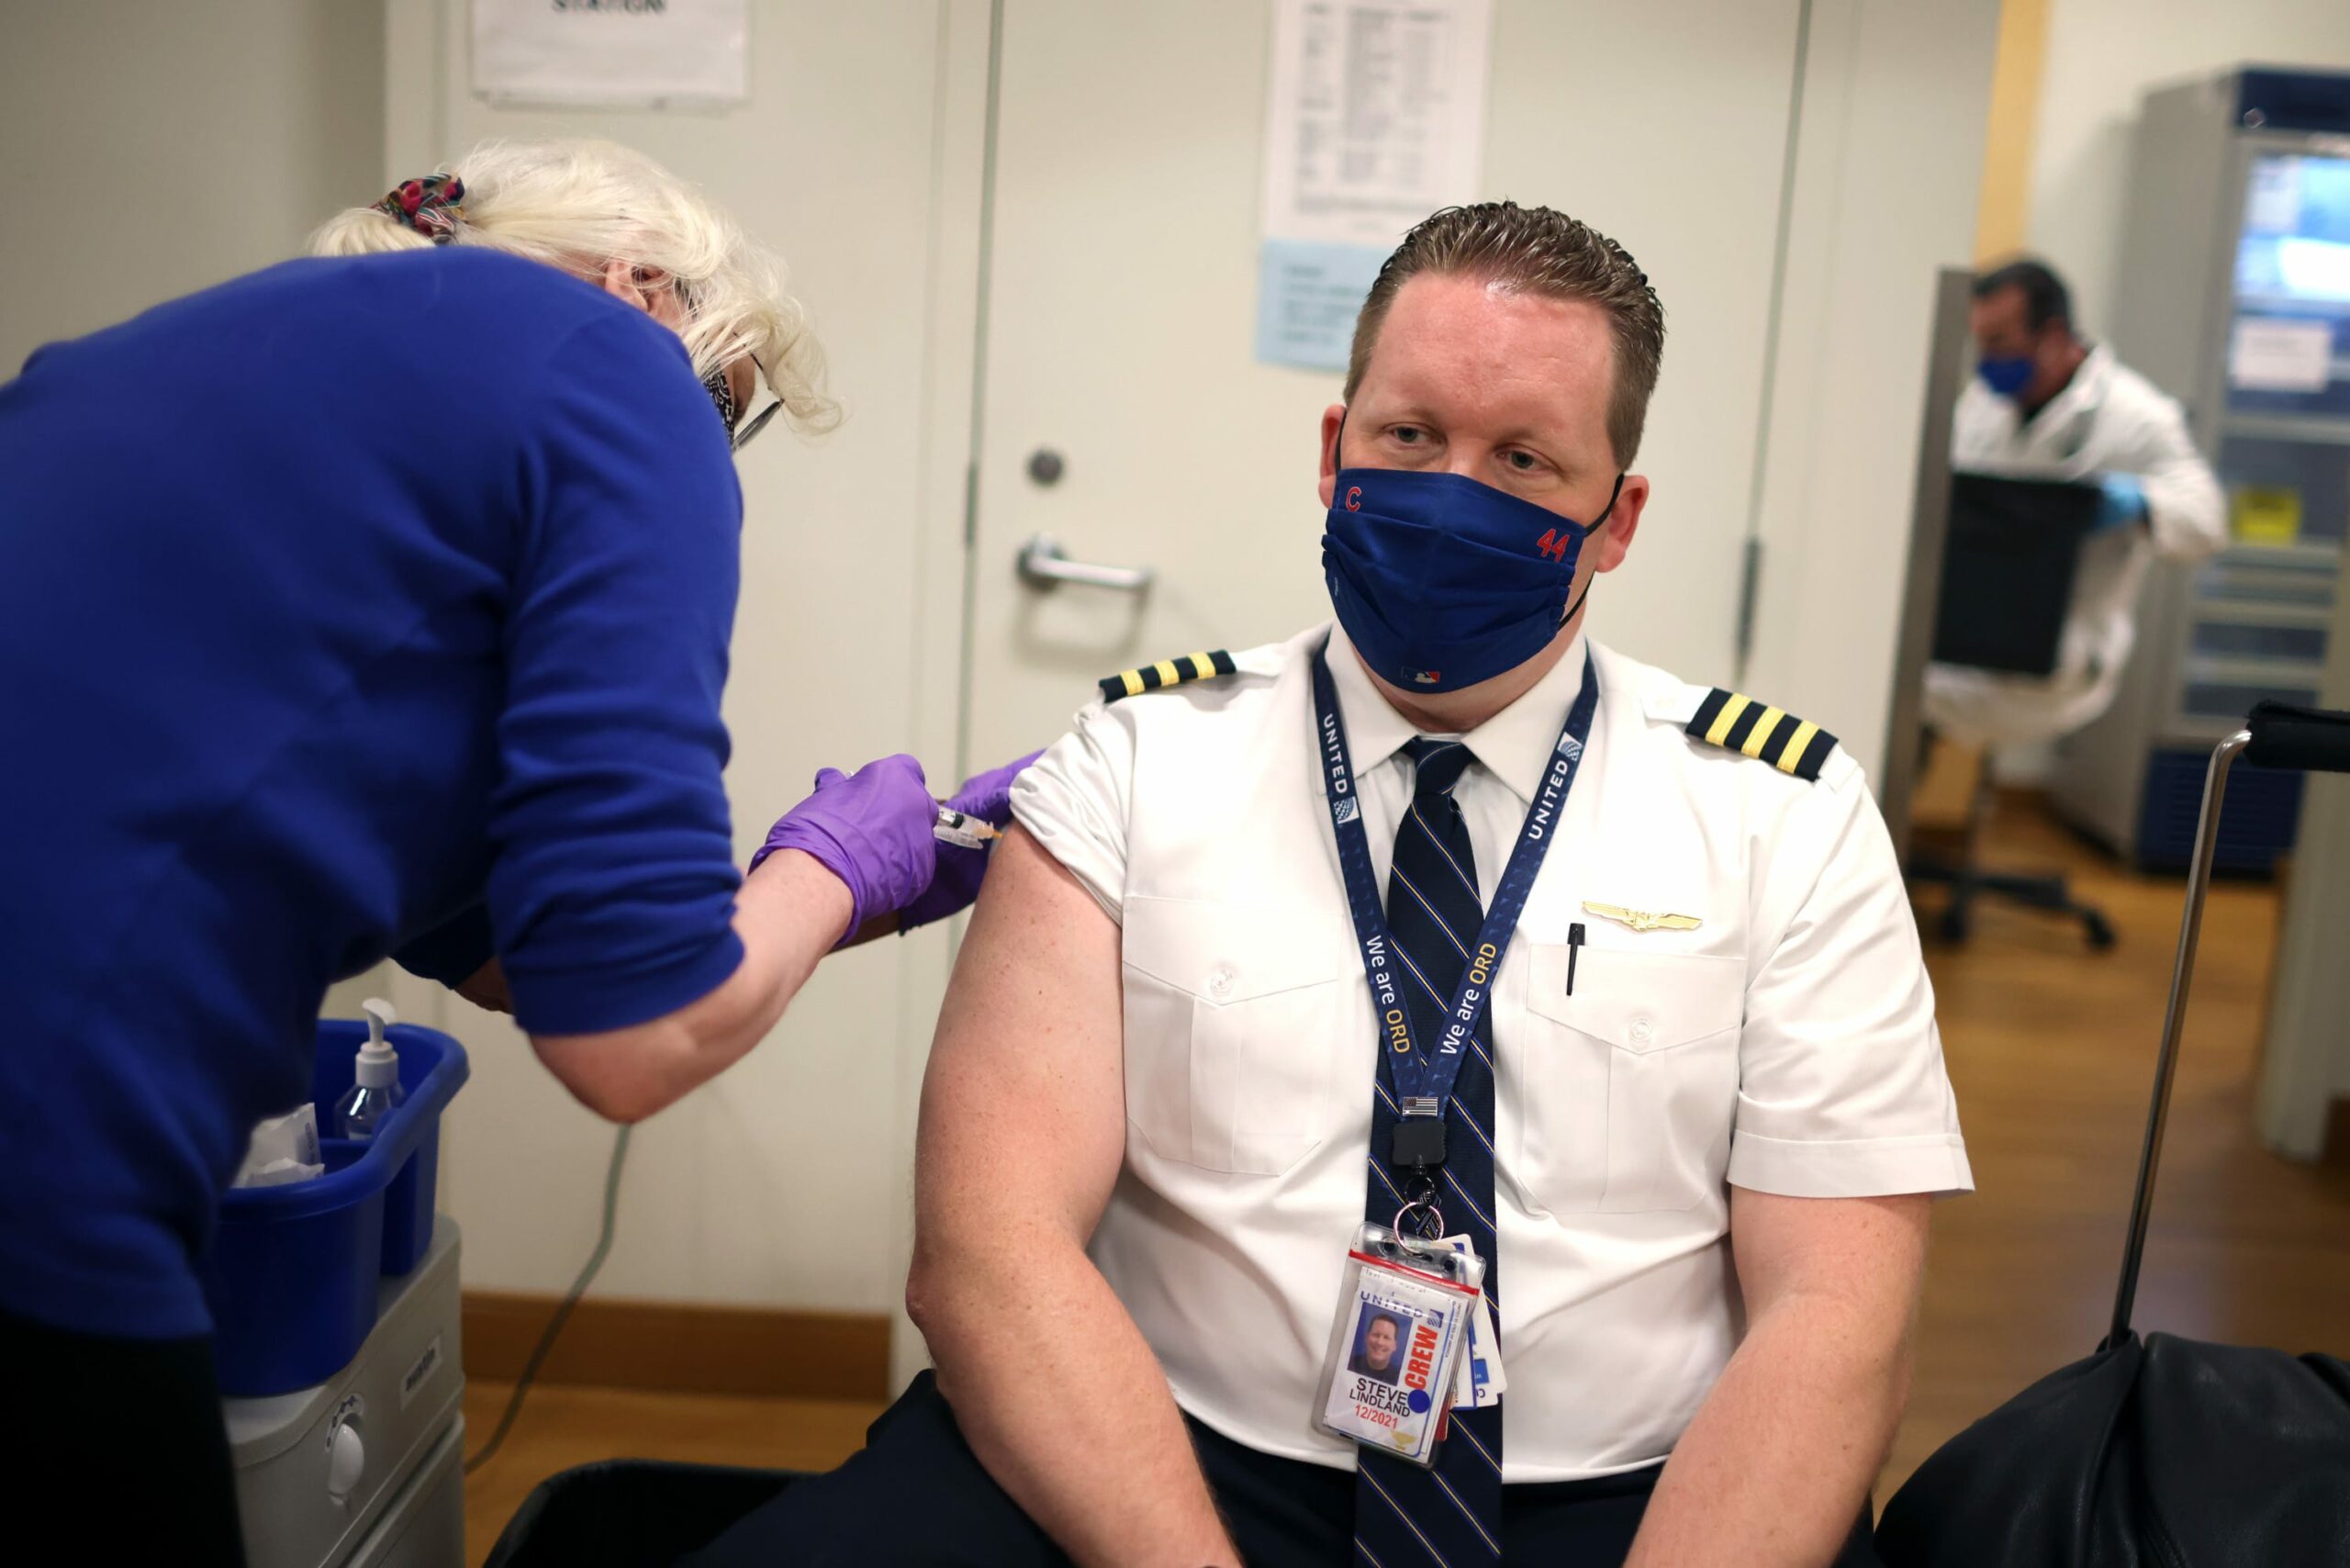 United Airlines says 593 employees face termination for failing to comply with vaccine mandate